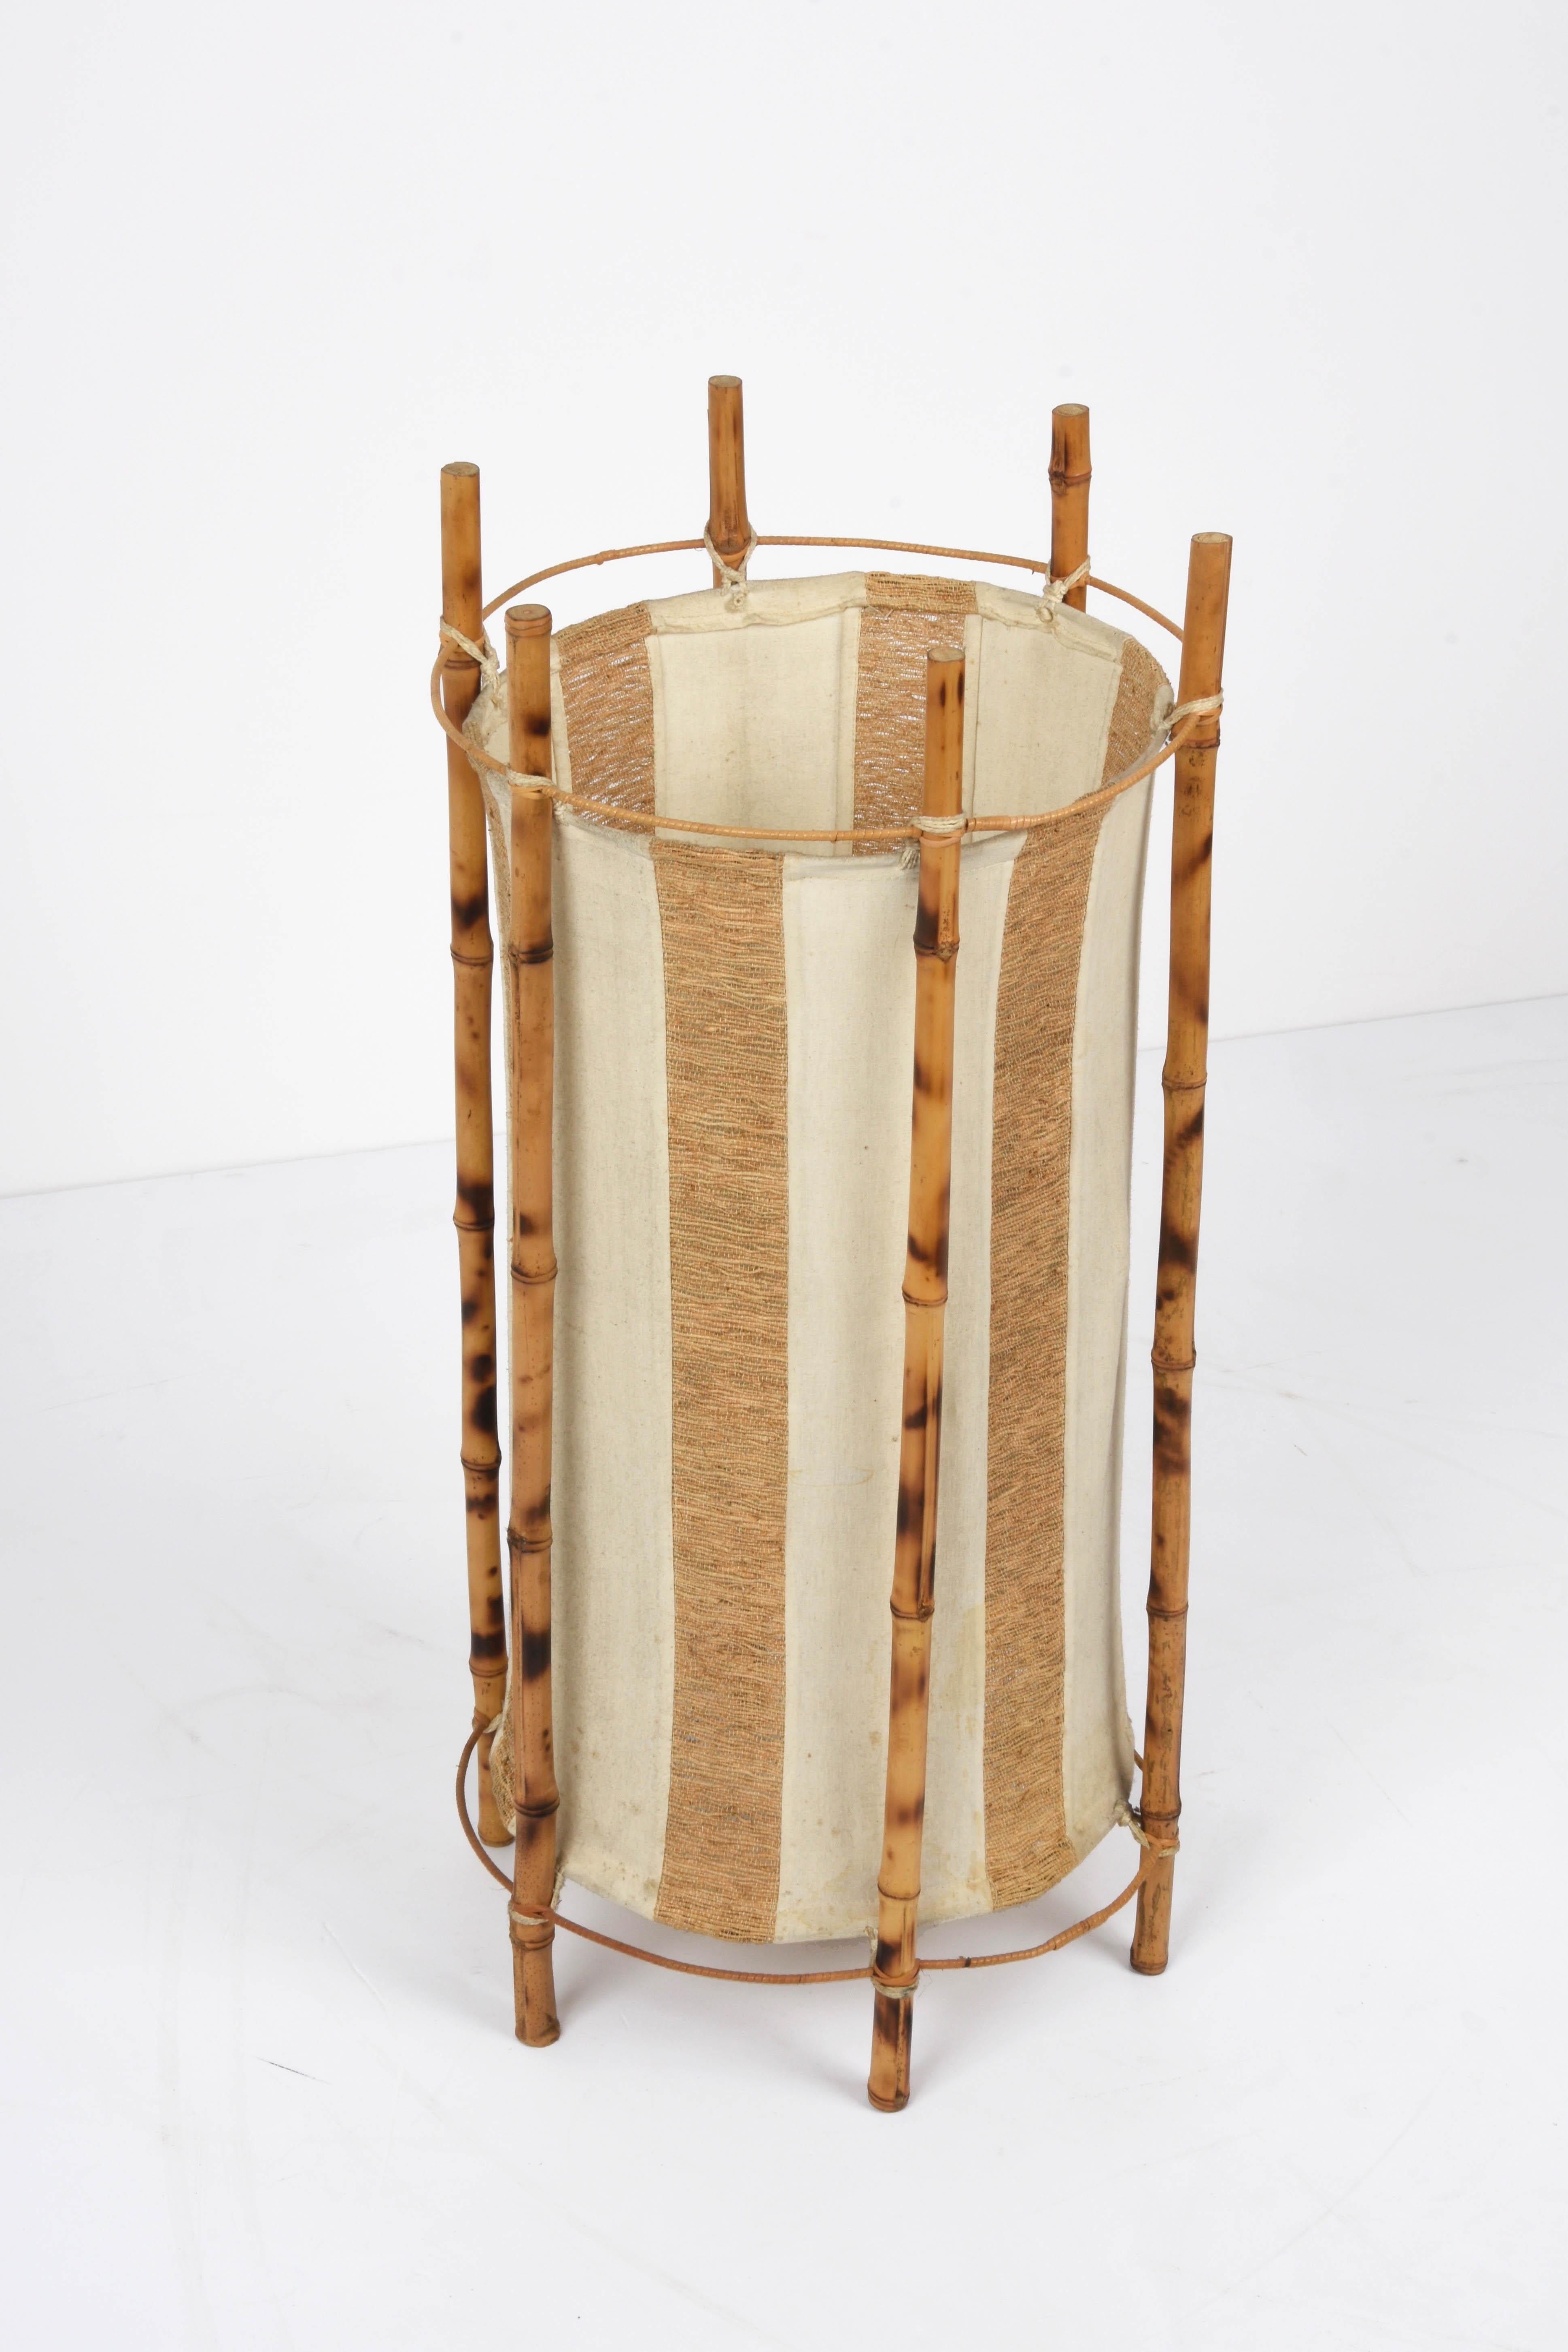 Louis Sognot Midcentury Cotton, Bamboo and Rattan Italian Floor Lamp, 1950s For Sale 4